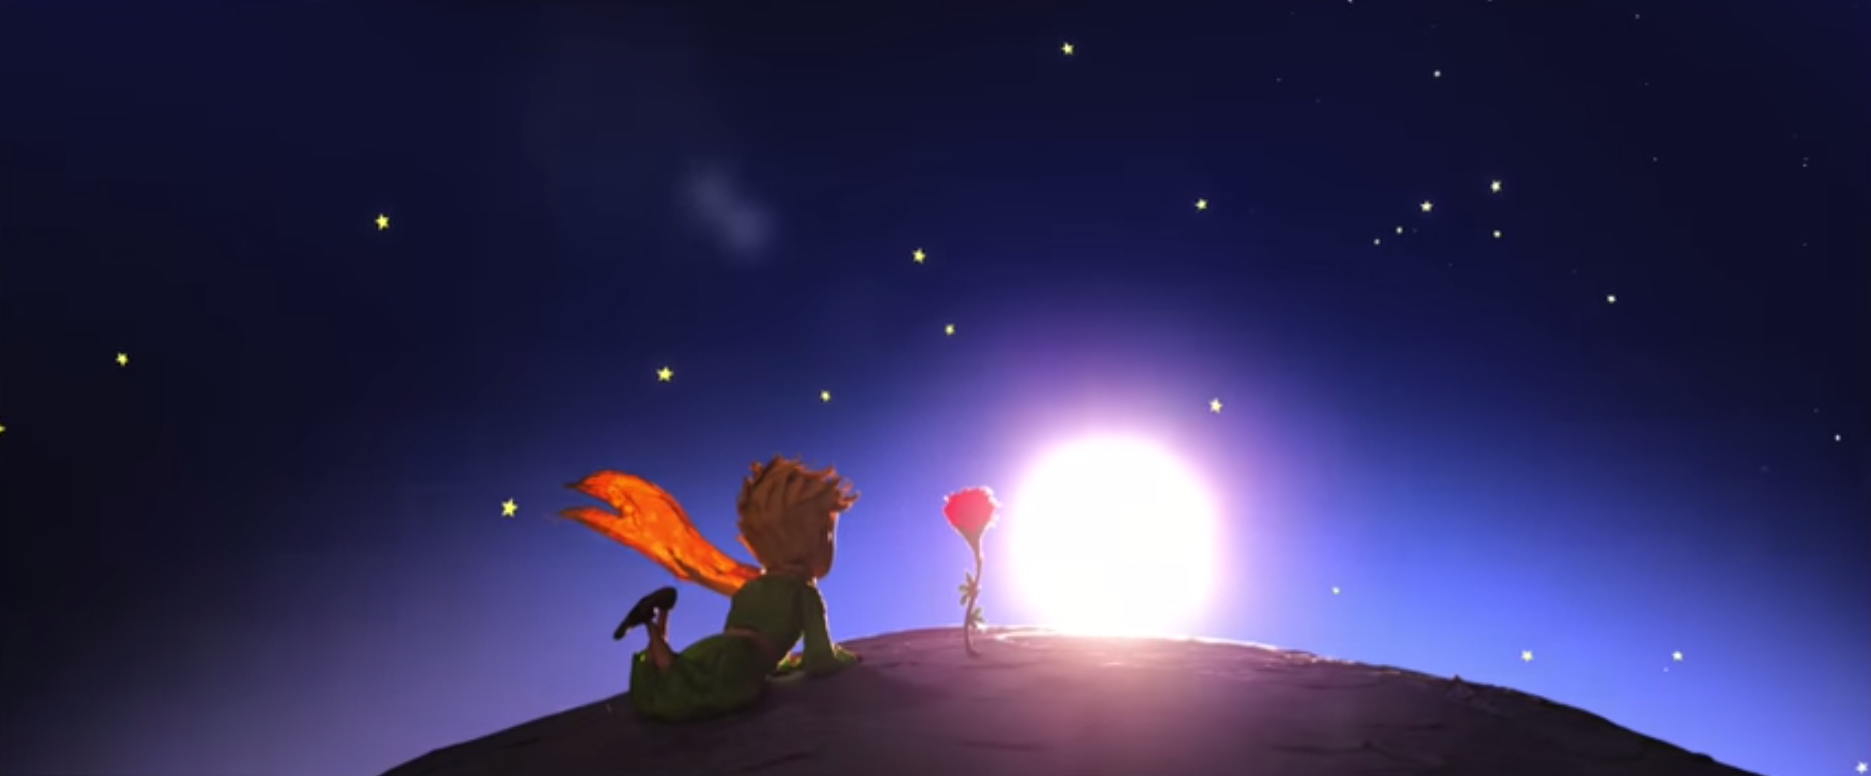 Teaser Trailer, Poster & Release Dates for 'The Little Prince'